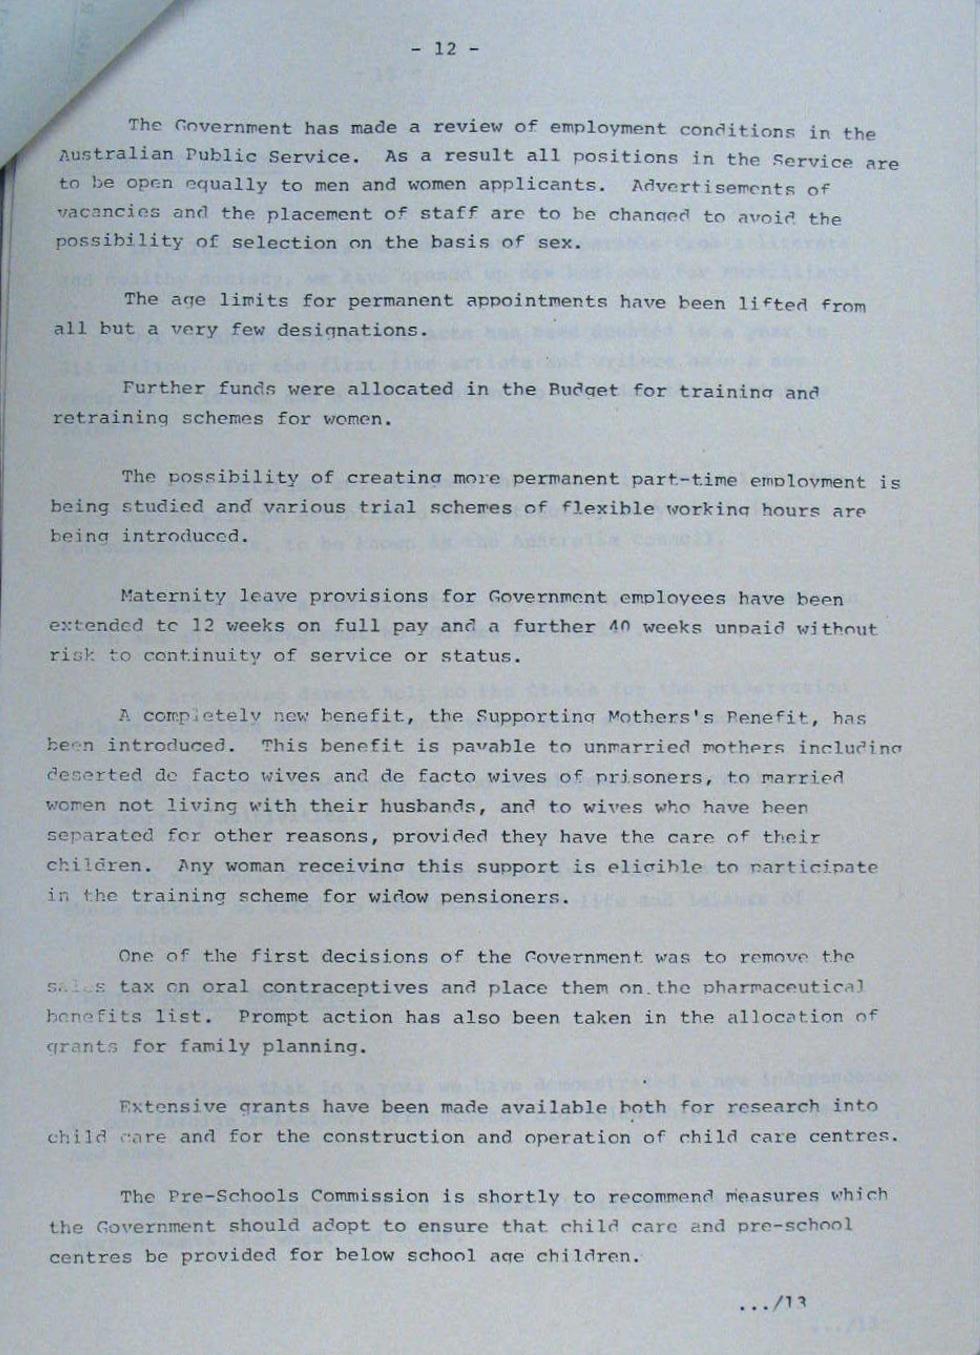 This is an electronic document with the Australian coat of arms at the top of the first page. The framed heading ‘Prime Minister’ sits below the coat of arms. The words ‘The First Year’ are underlined, followed by the words ‘Statement by the Prime Minister the Hon. E.G. Whitlam, Q.C., M.P., on the achievements of the Labor Government’s first year of office’.